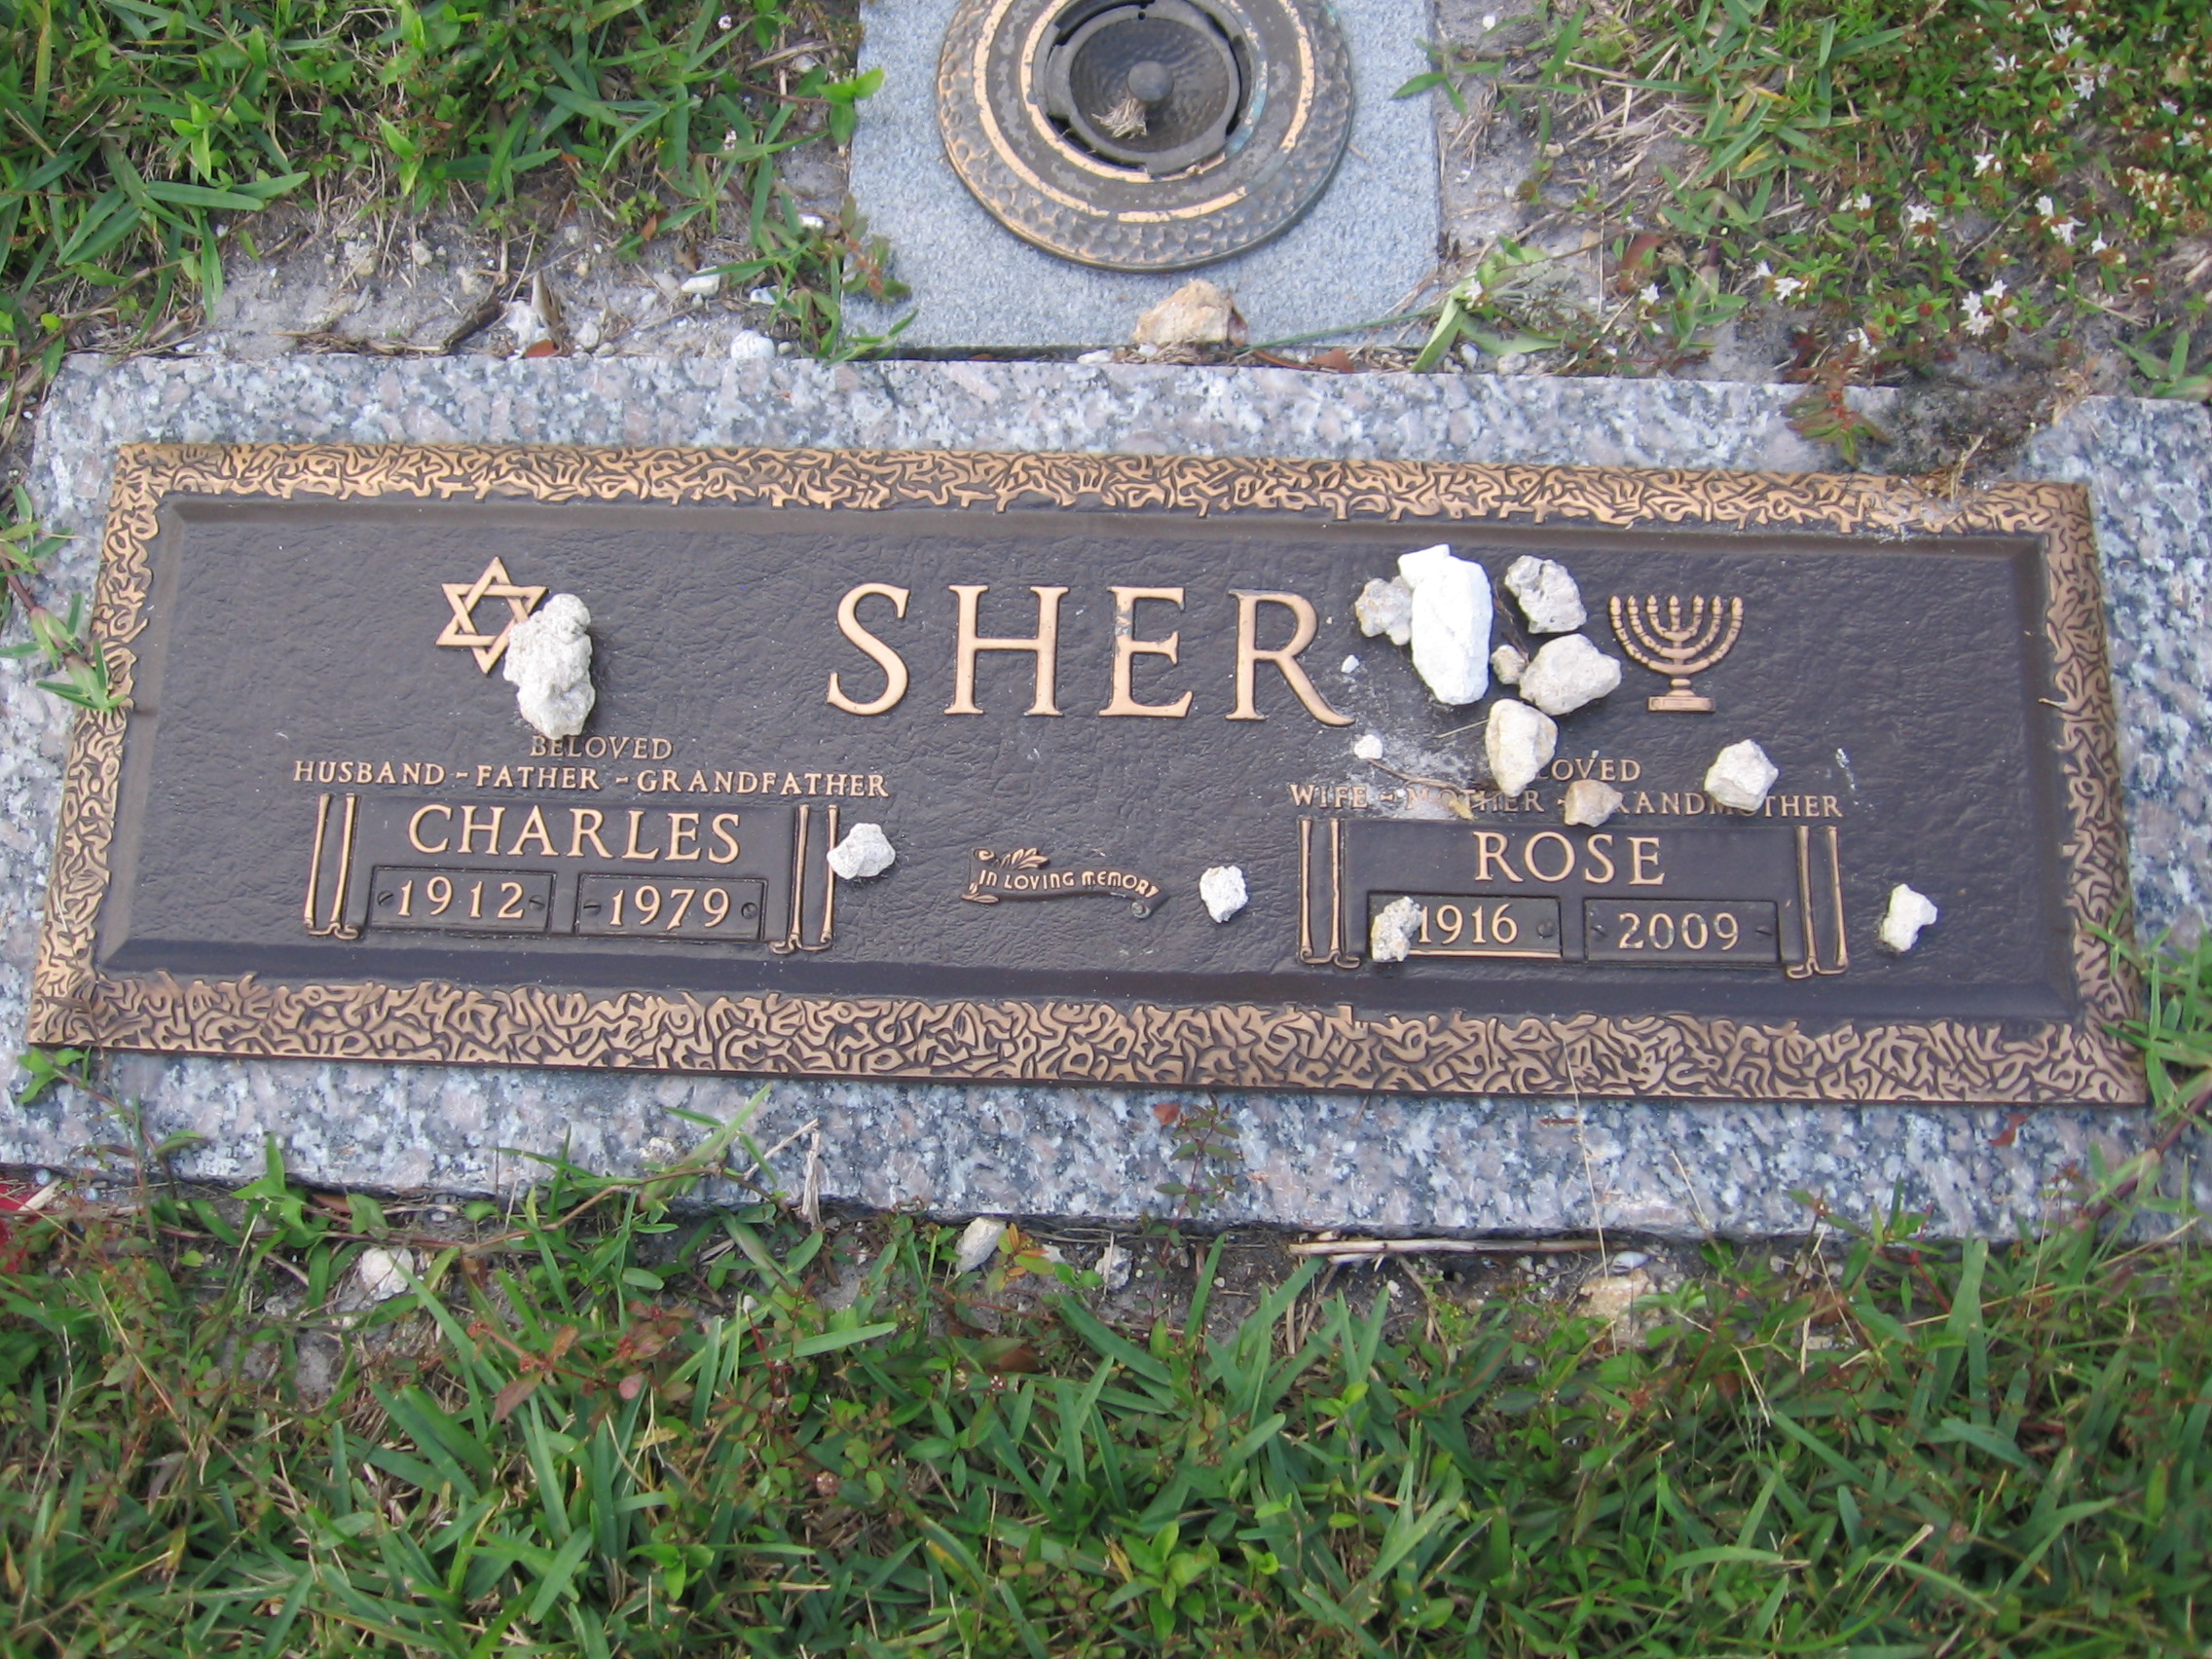 Charles Sher